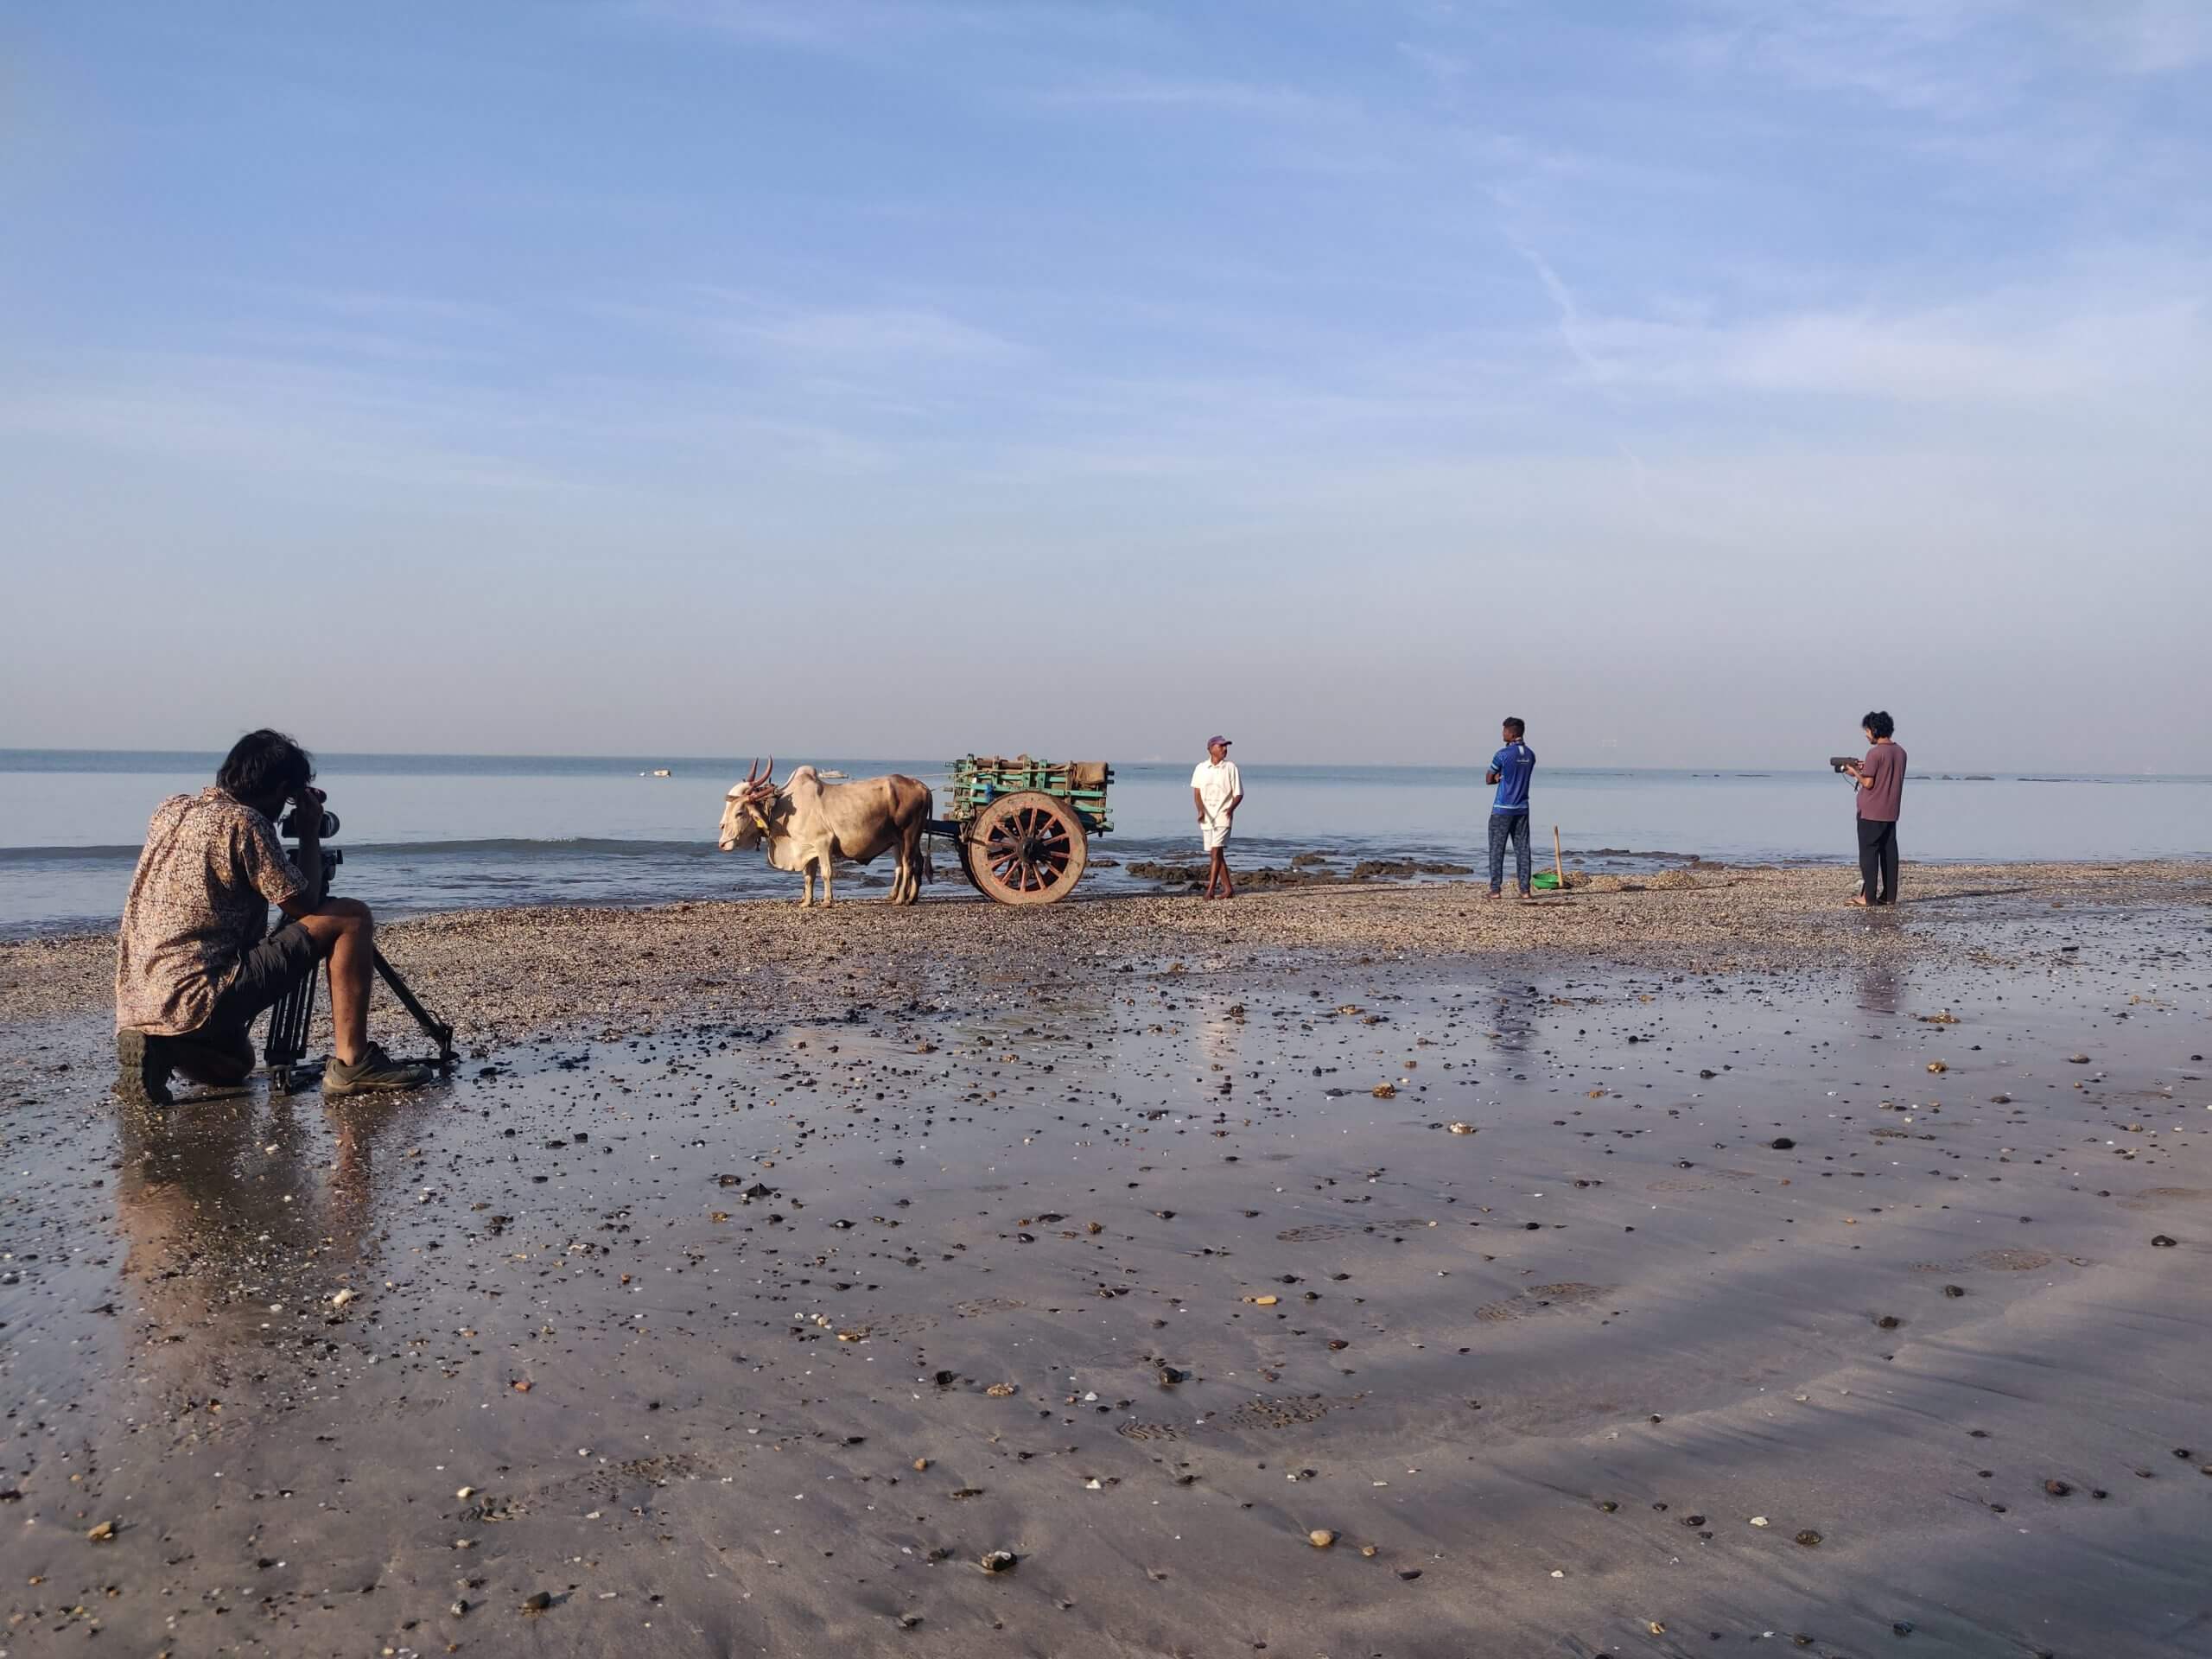 Production shot of Against the Tide. A man with a camera records other three men on the sea shore, there is a carriage with an animal pulling it and three men standing next to the carriage.